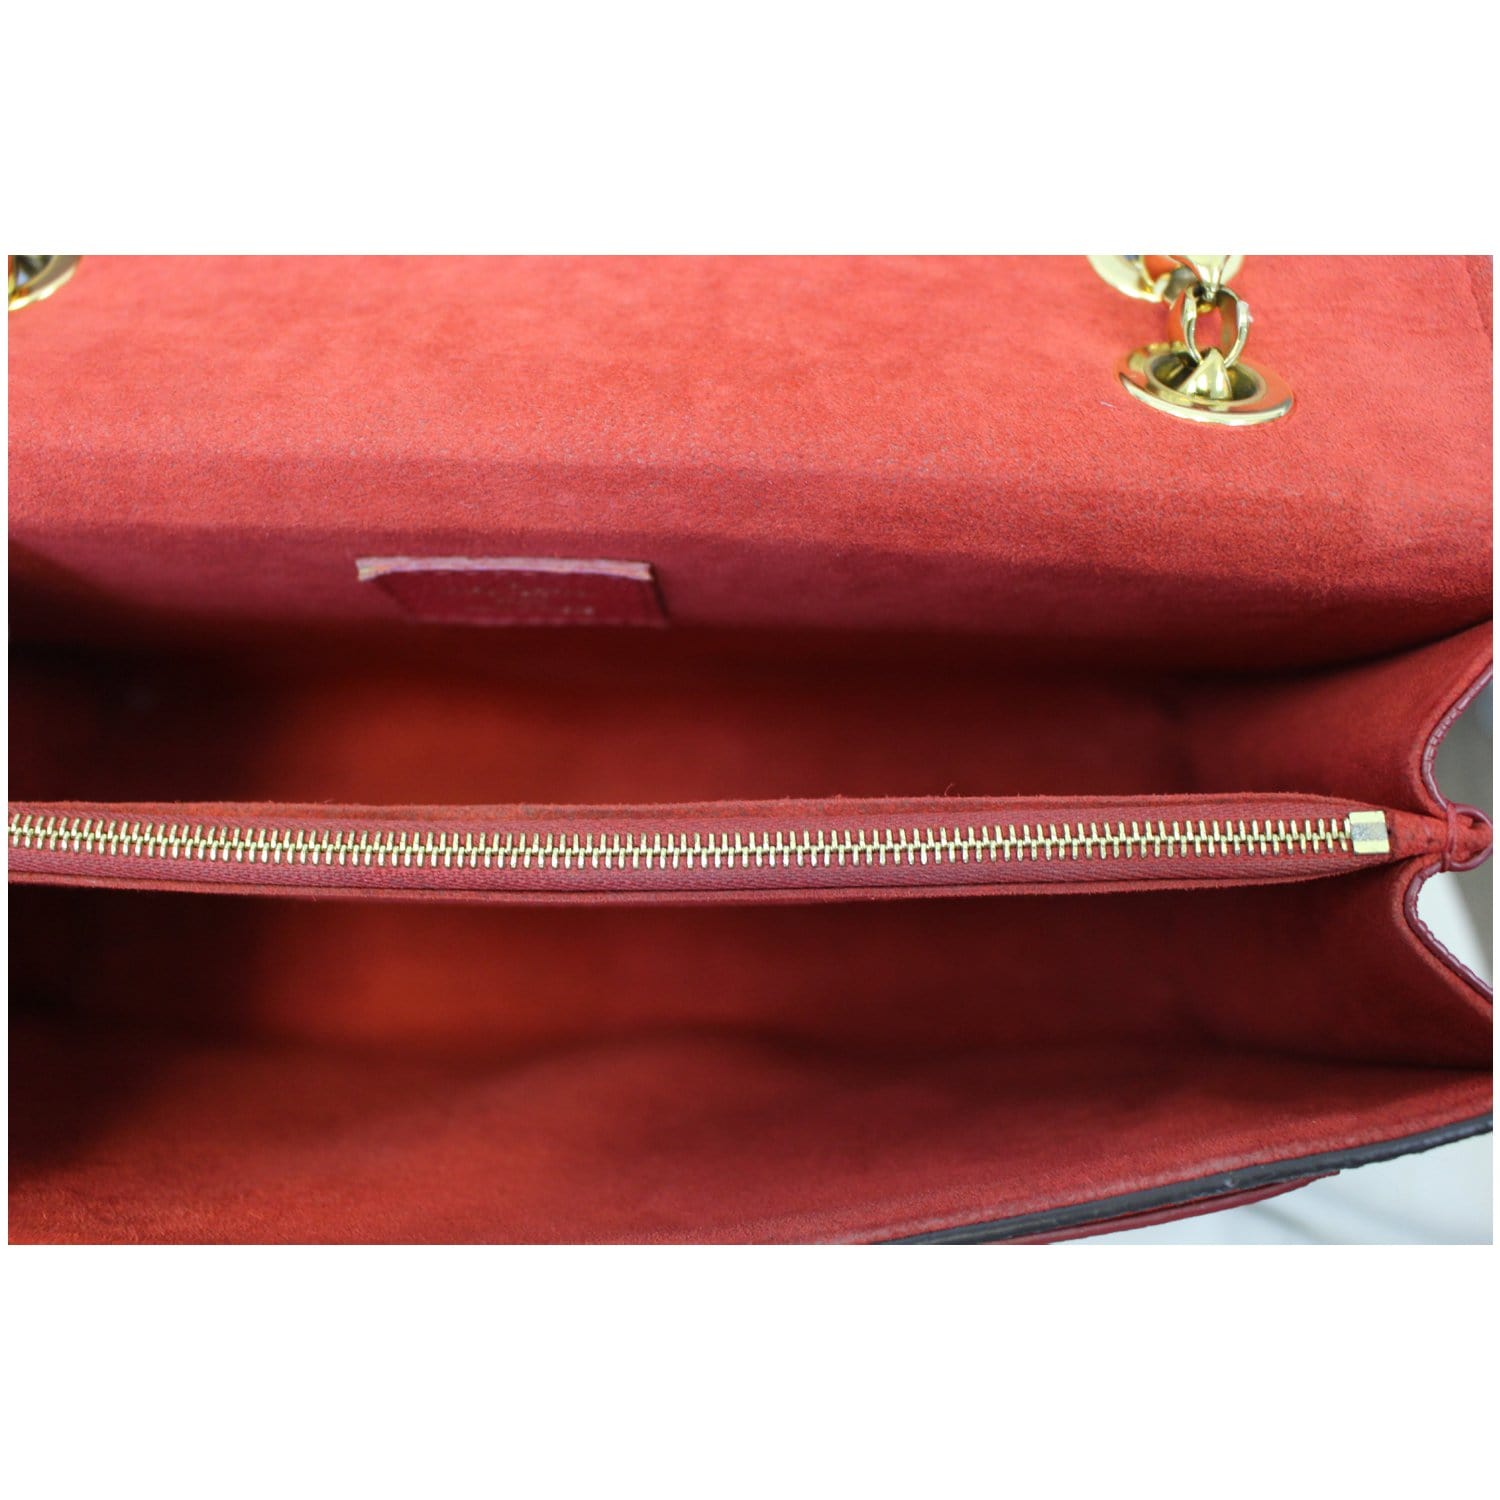 Buy Pre-Owned LOUIS VUITTON Victoire NM Monogram Canvas Cerise Red Leather